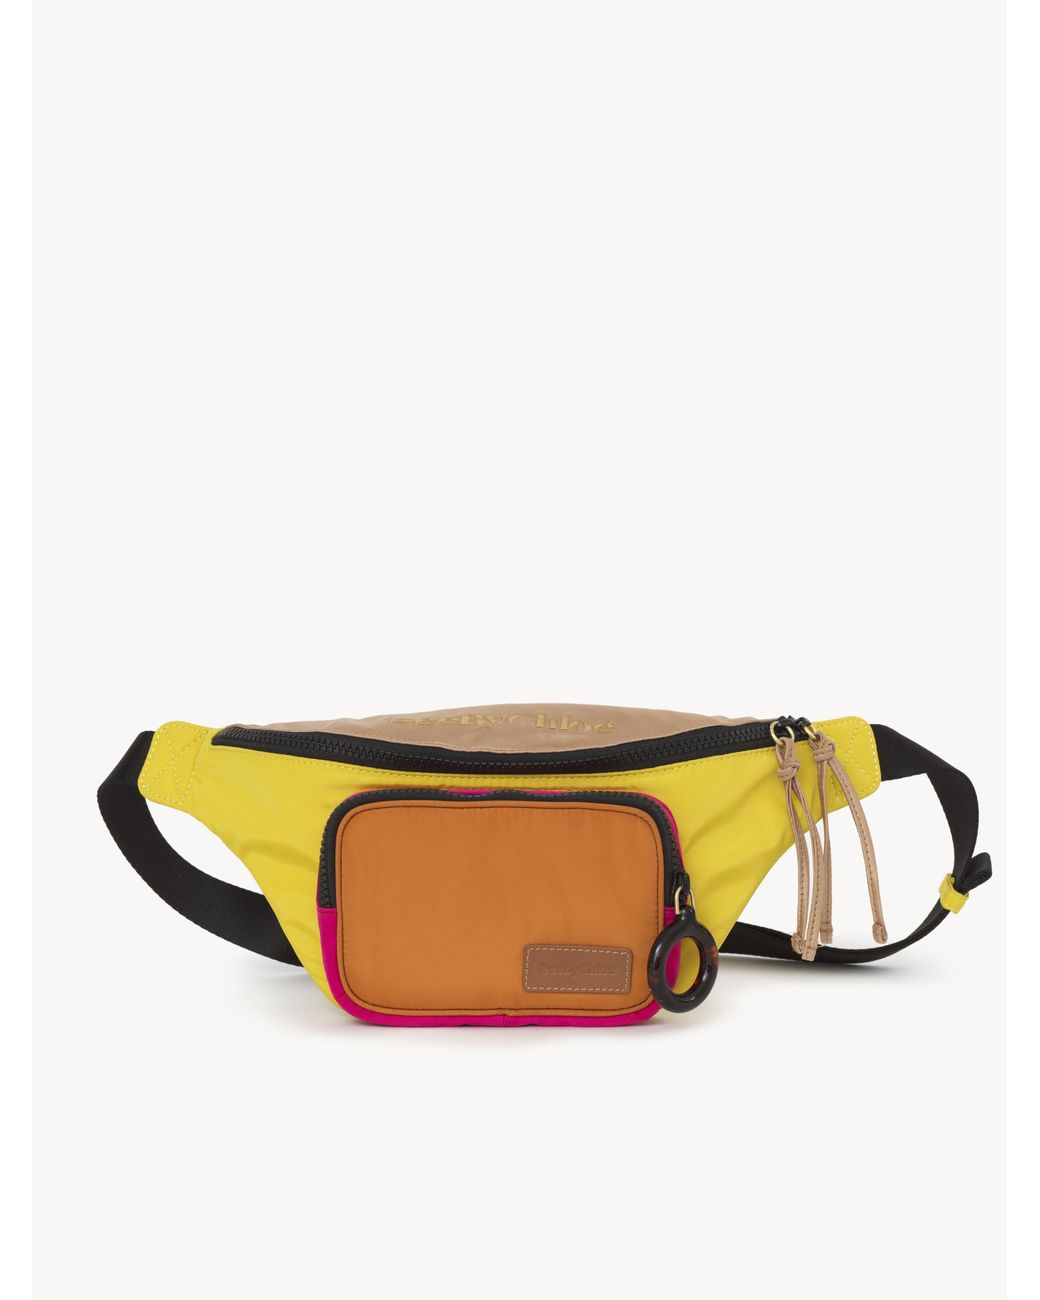 See By Chloé Tilly Belt Bag in Yellow | Lyst